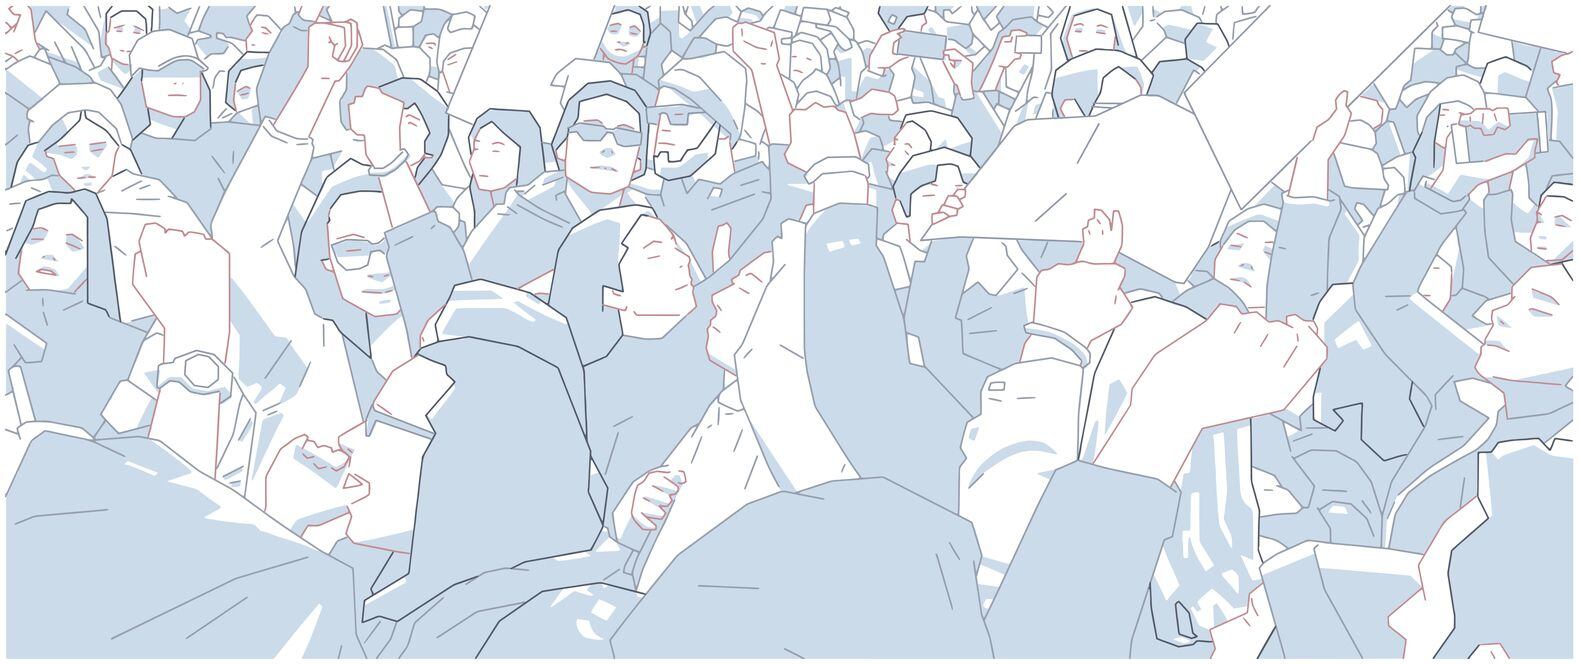 Stylzied illustration of large crowd demonstration with signs and banner